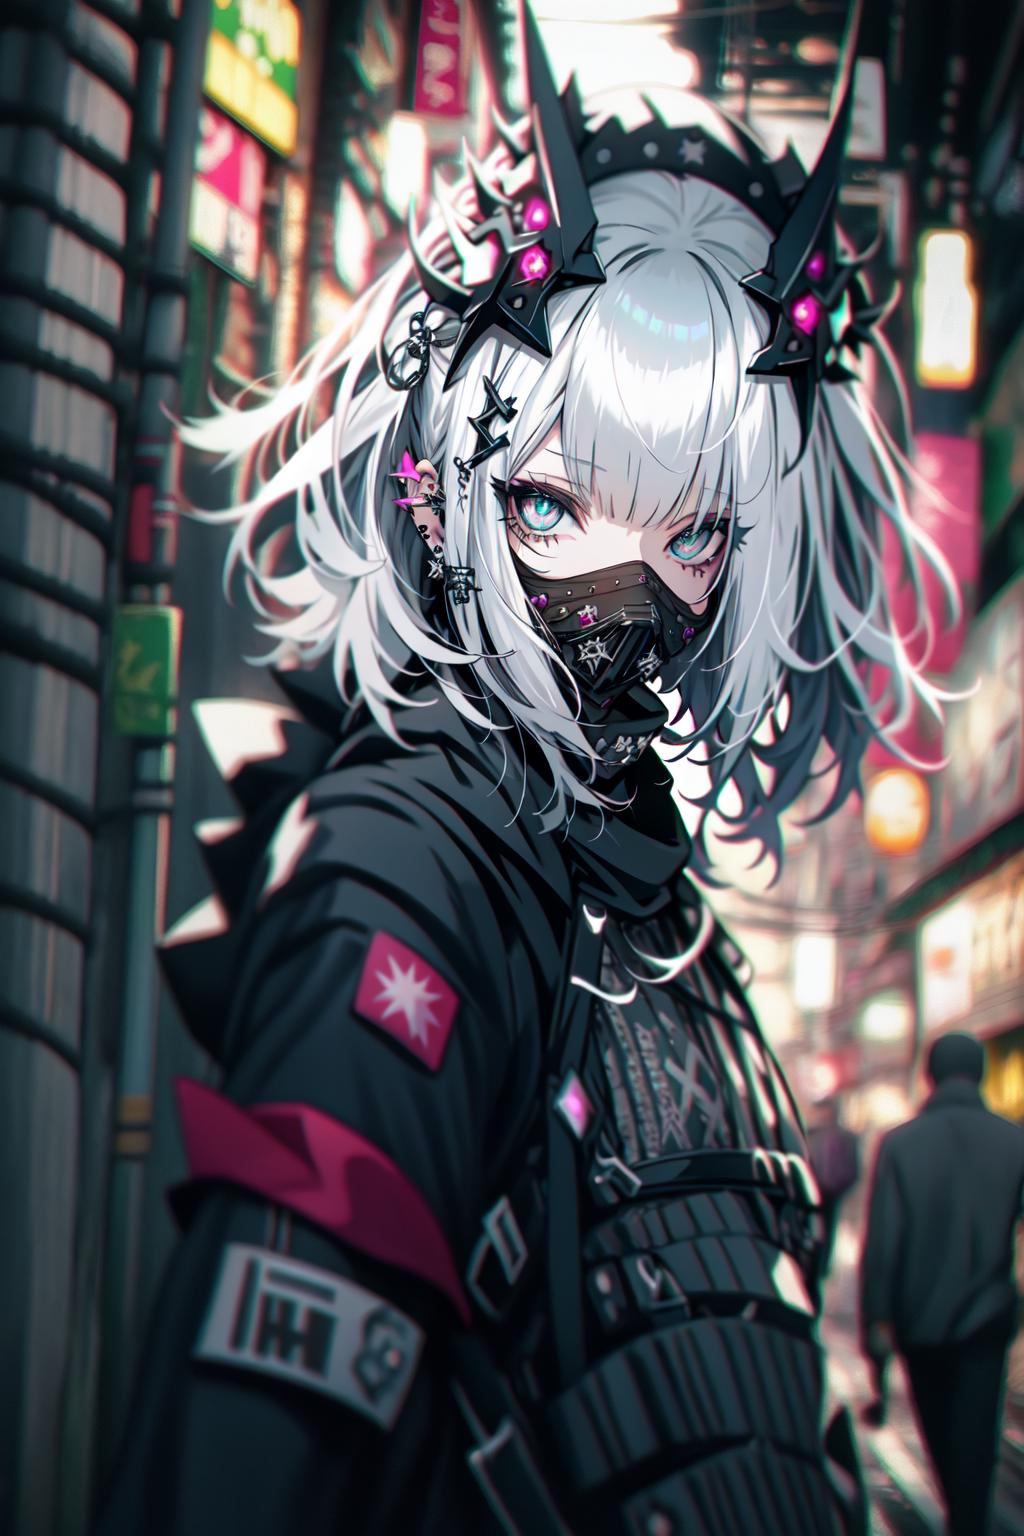 Gothic Punk Girl image by lununs809